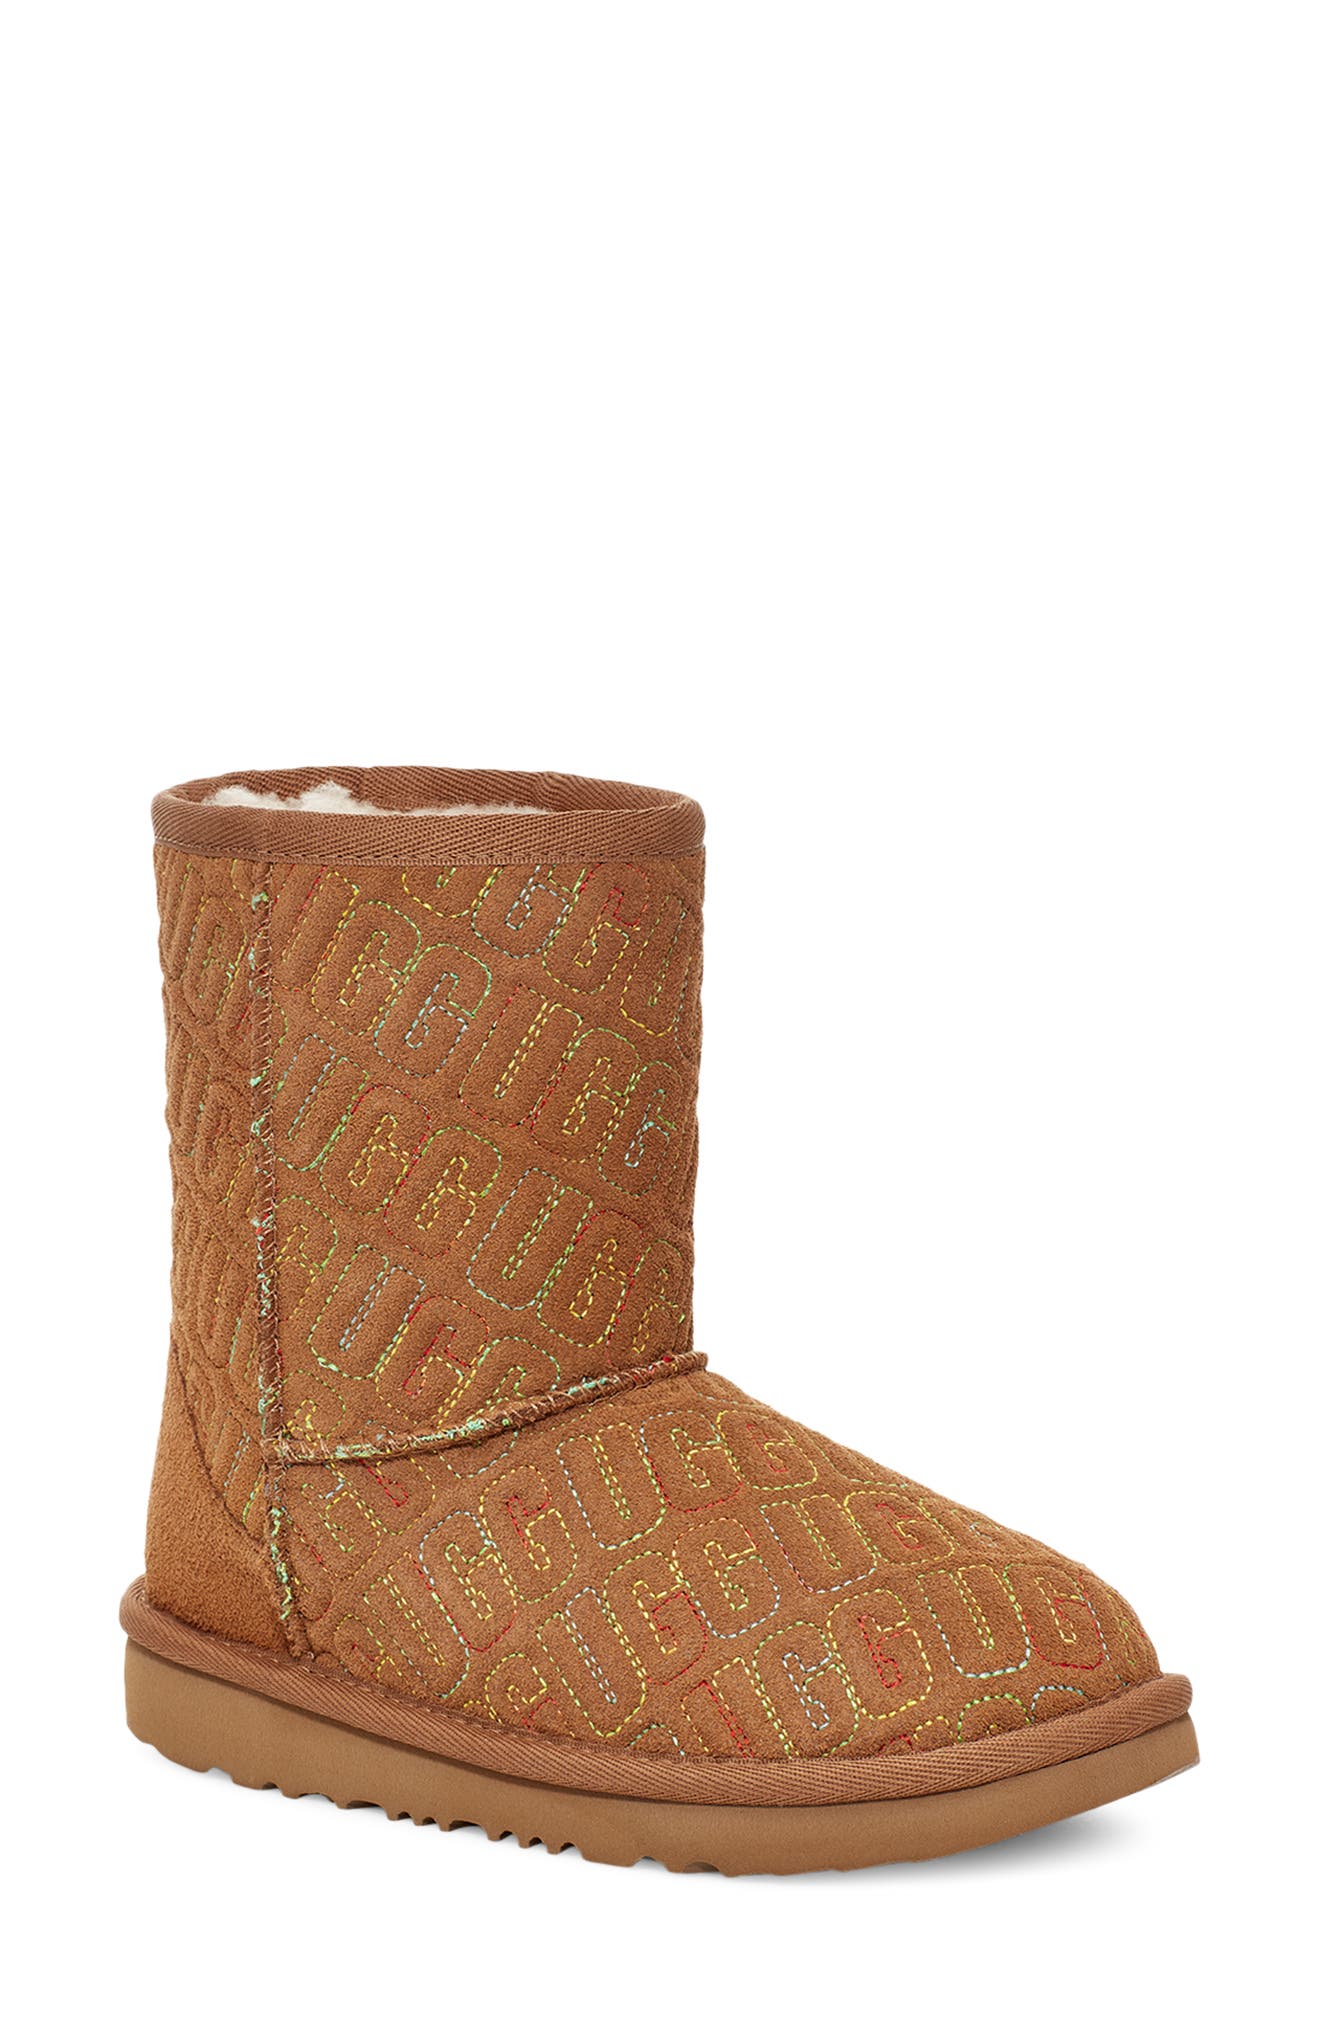 nordstrom uggs for toddlers